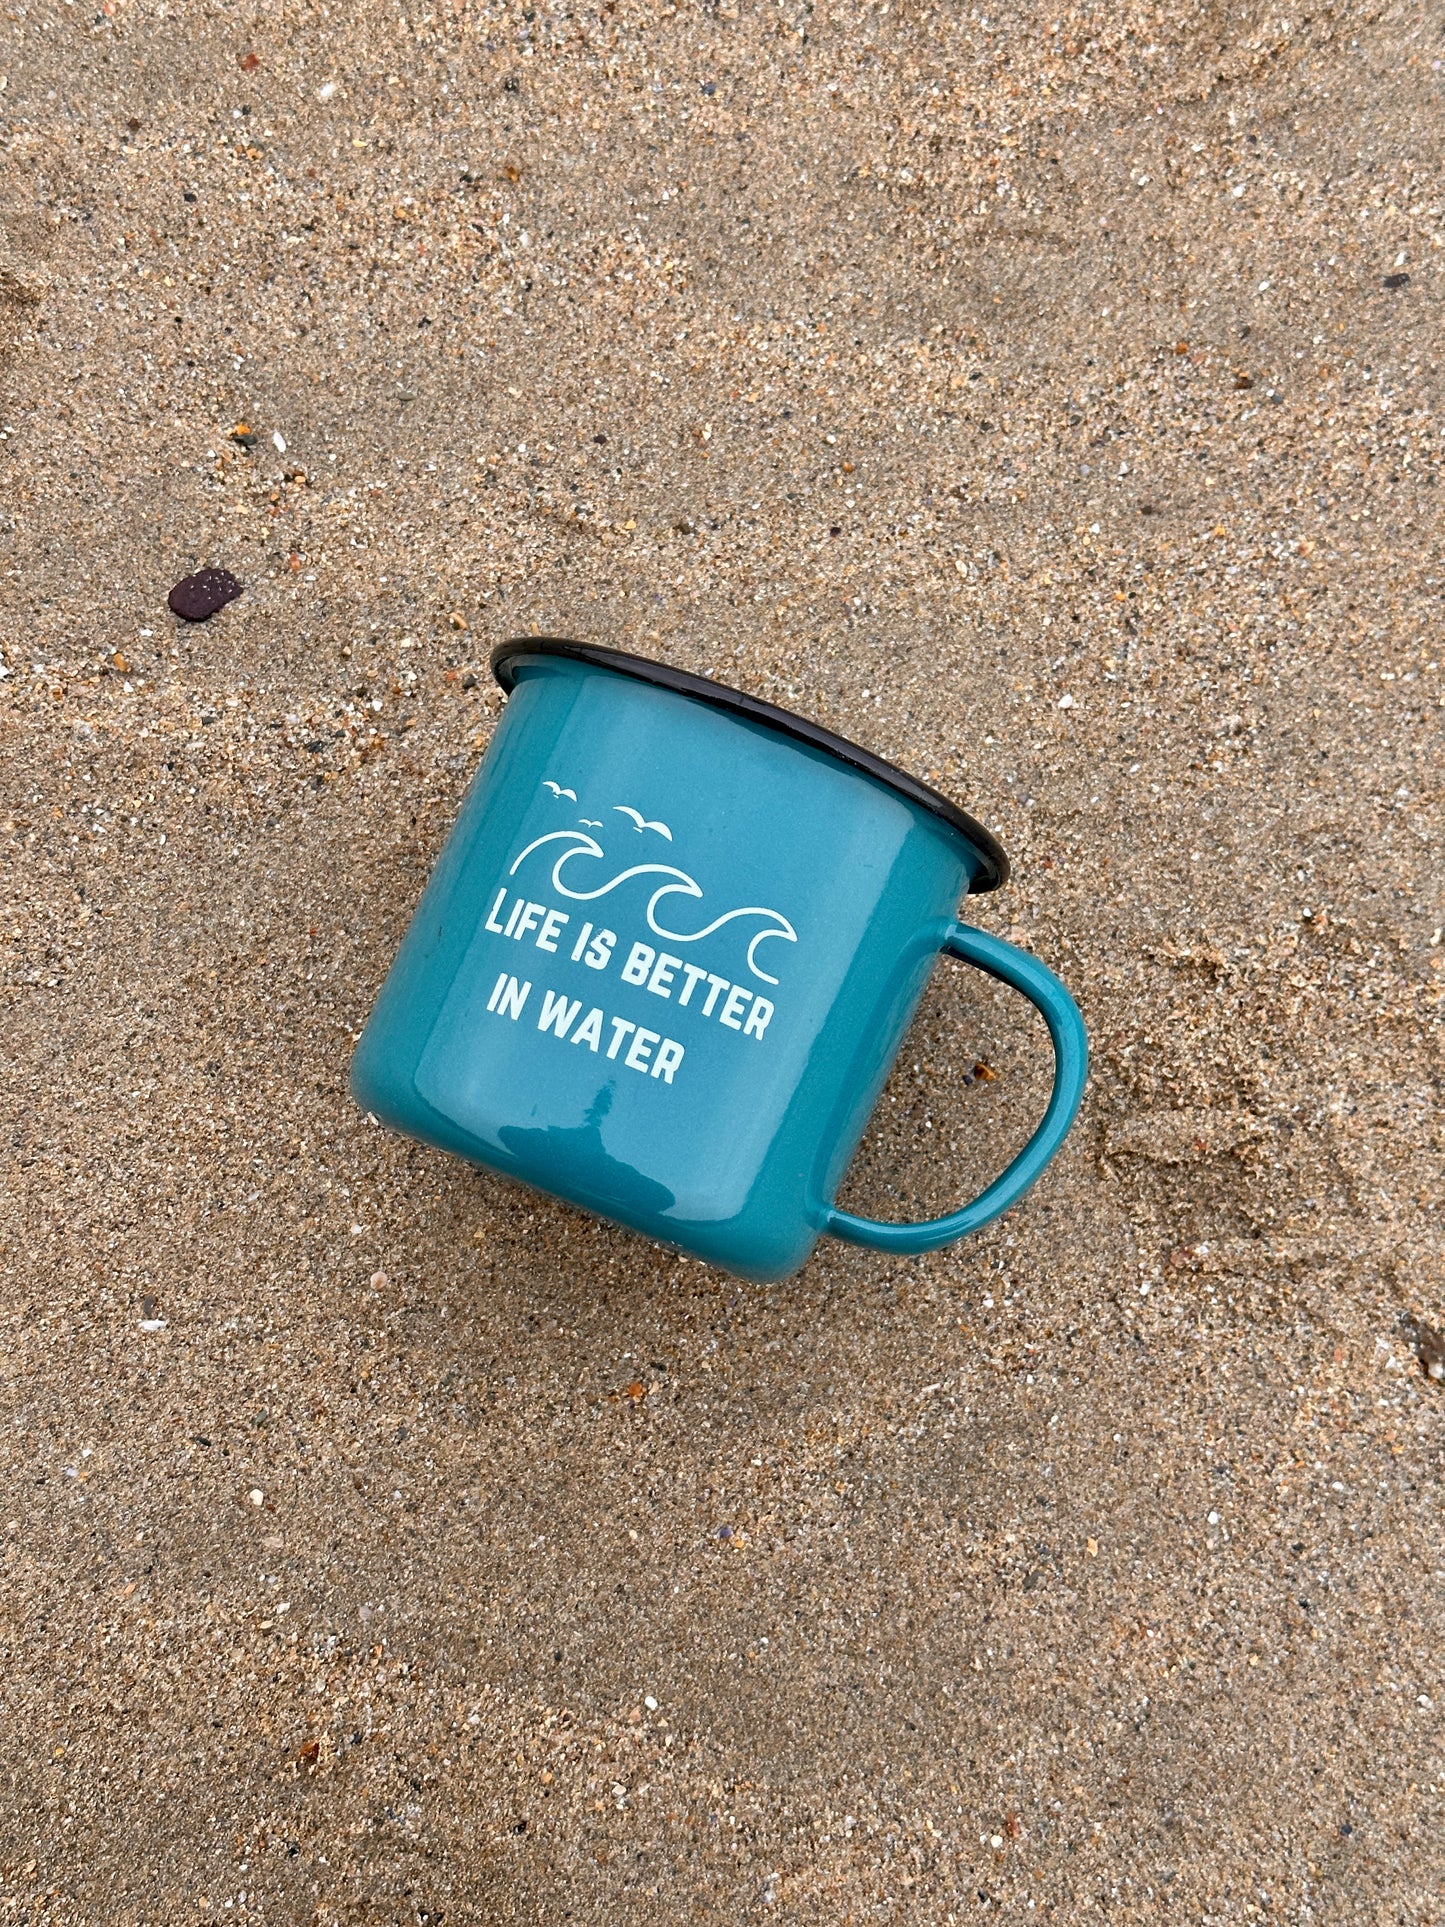 Life Is Better In Water Mug